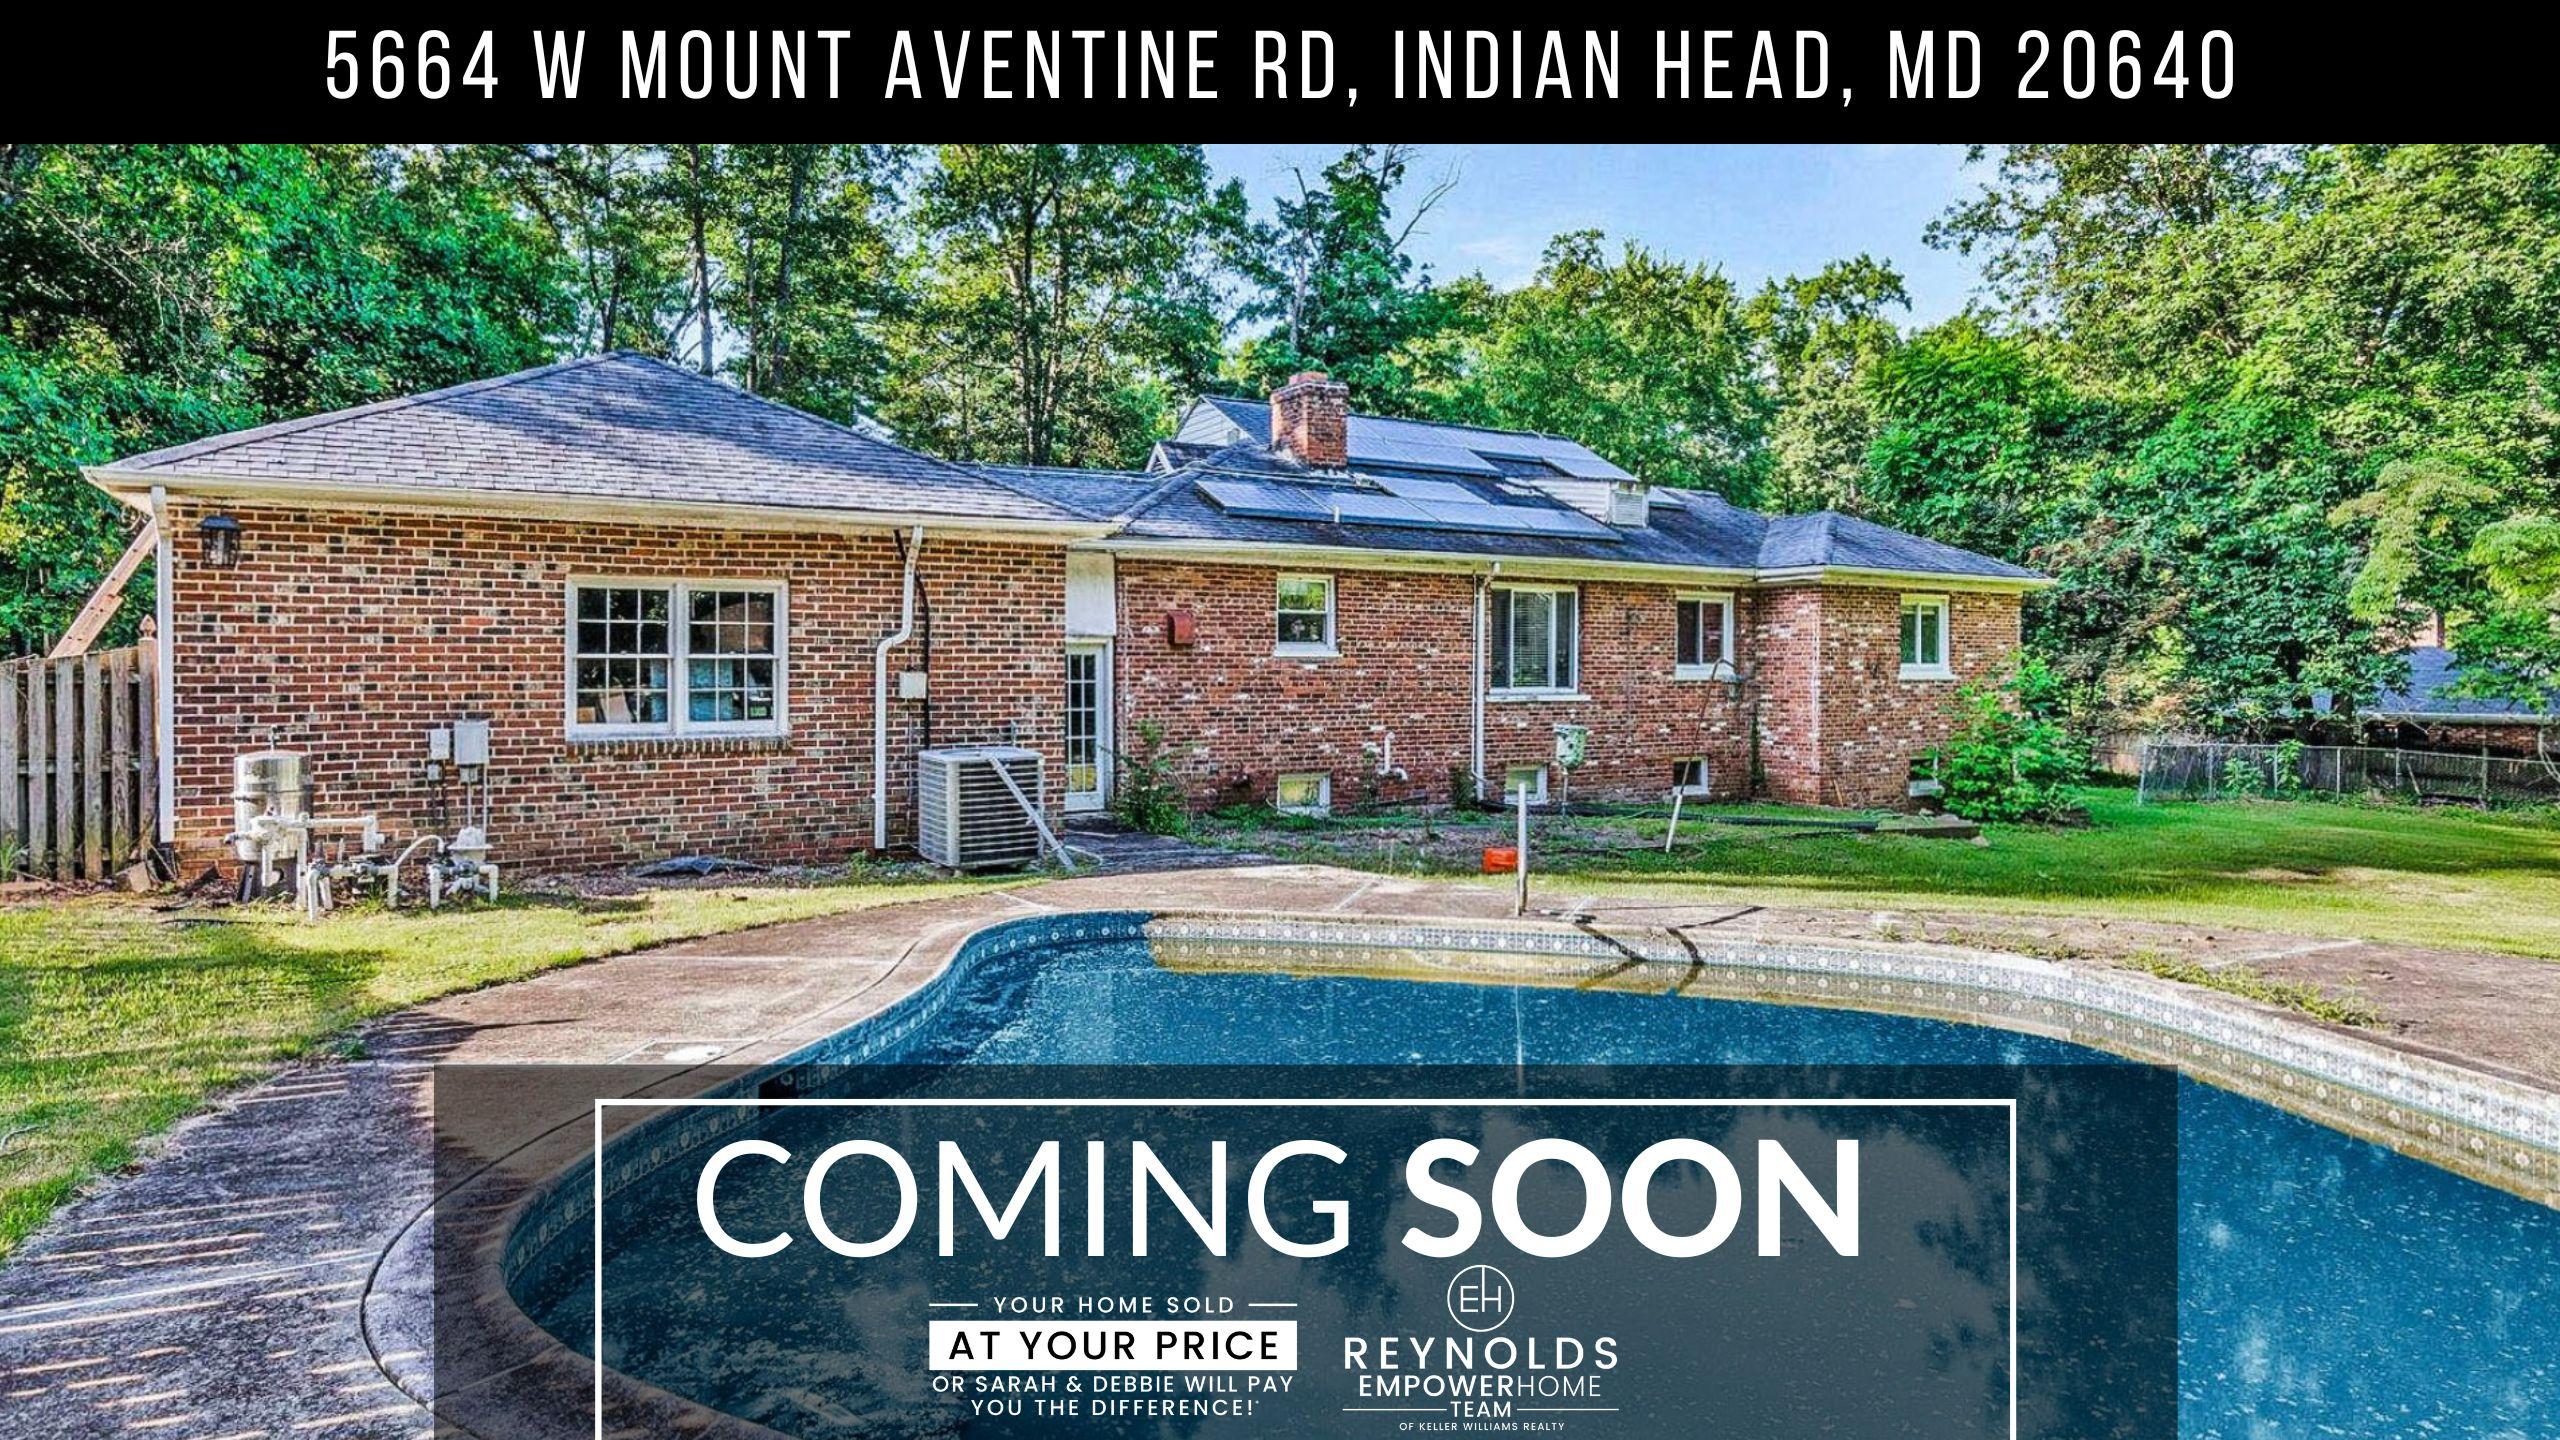 5664 W Mount Aventine Rd, Indian Head, MD 20640